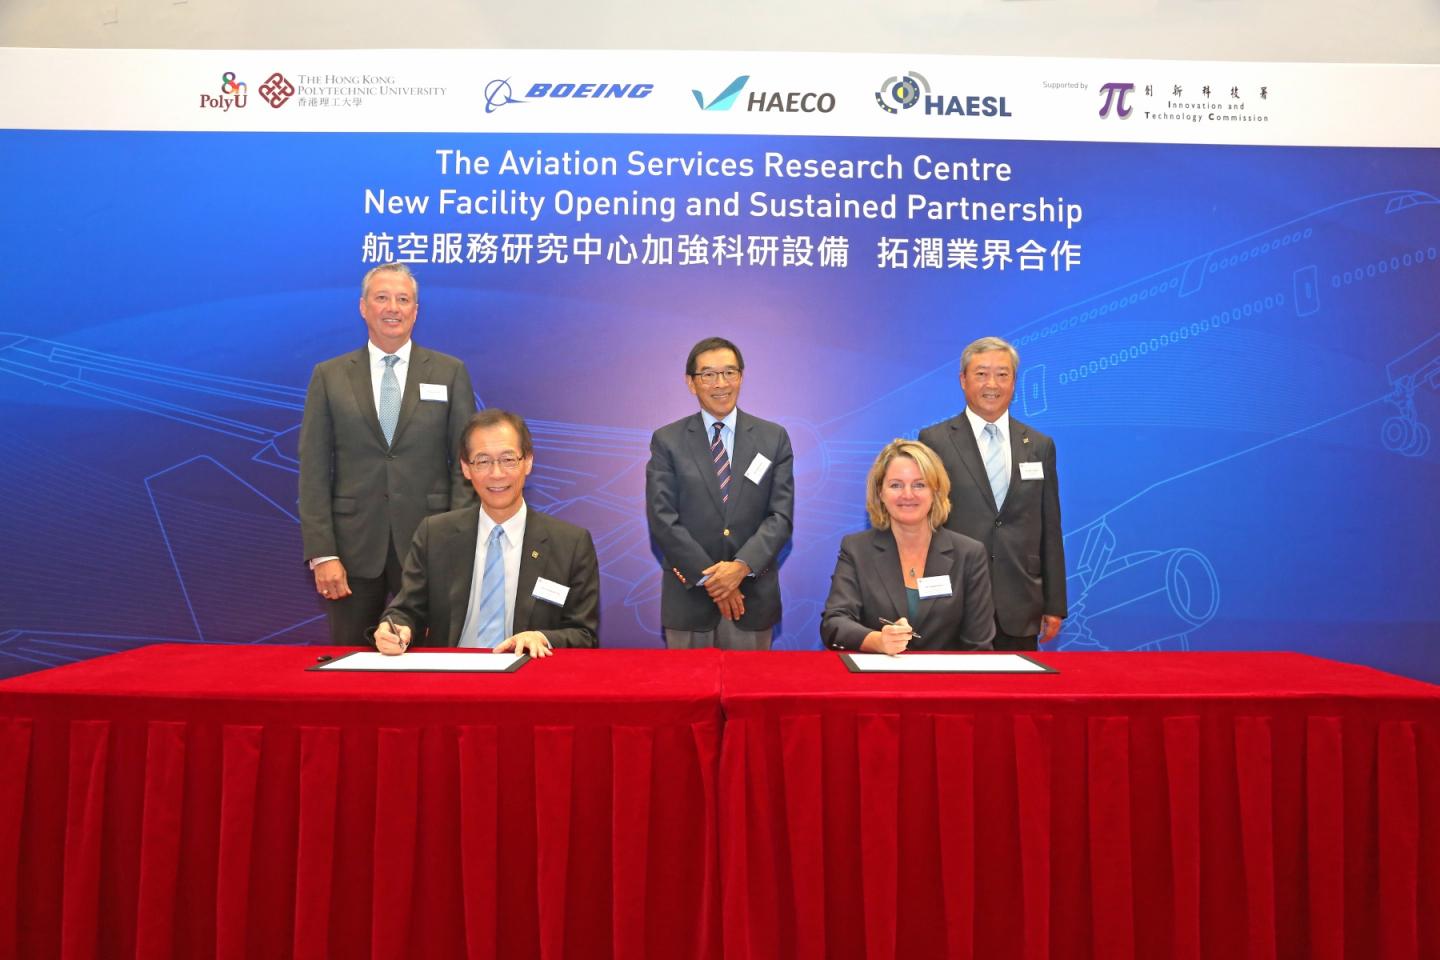 PolyU and Boeing Signed to Renew a Partnership for Another 5 Years